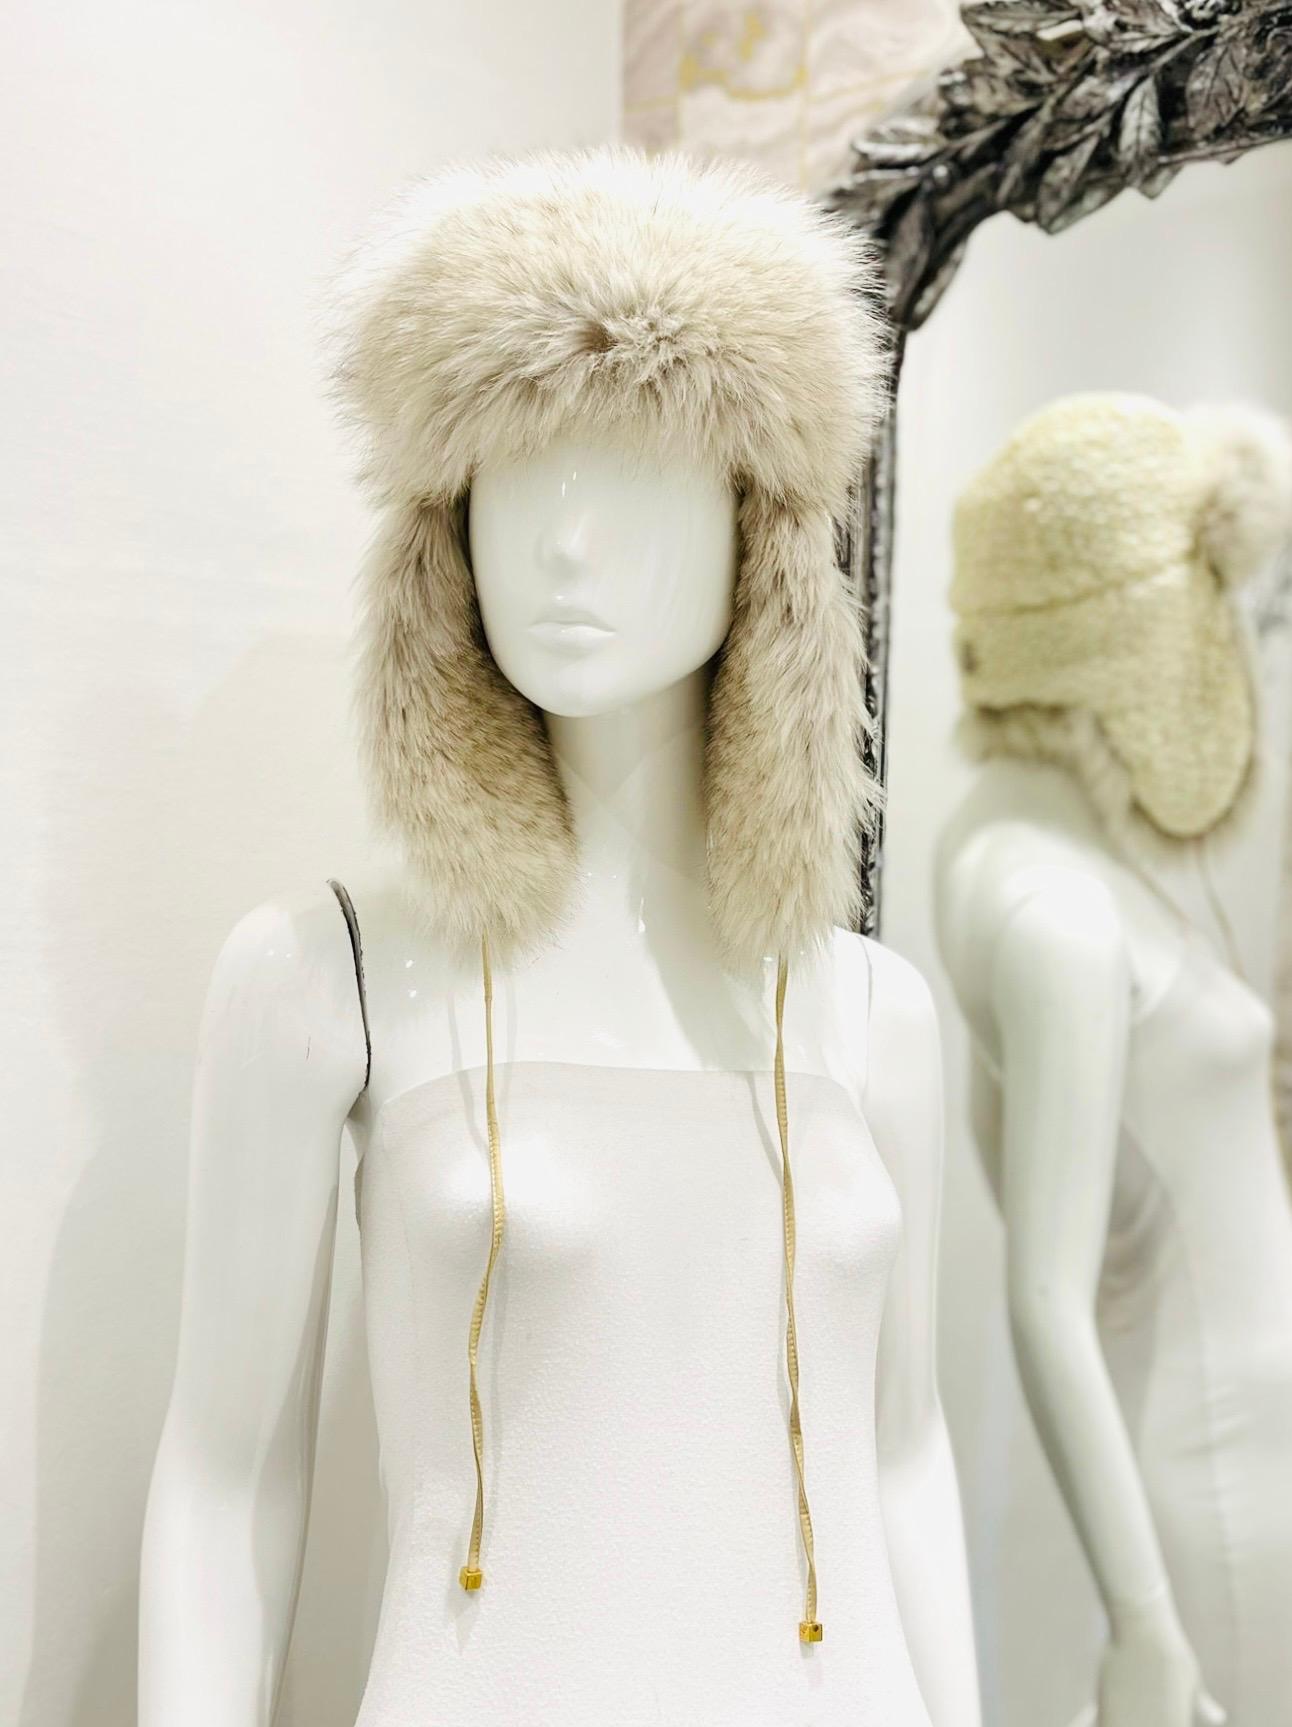 Moncler Fox Fur Hat

Ivory winter cap crafted from bubble quilted nylon with fox fur lining and trims.

Detailed with signature 'Moncler' logo to rear and two cords on either side. Rrp £370

Size – One Size

Condition – Very Good (Cracking leather